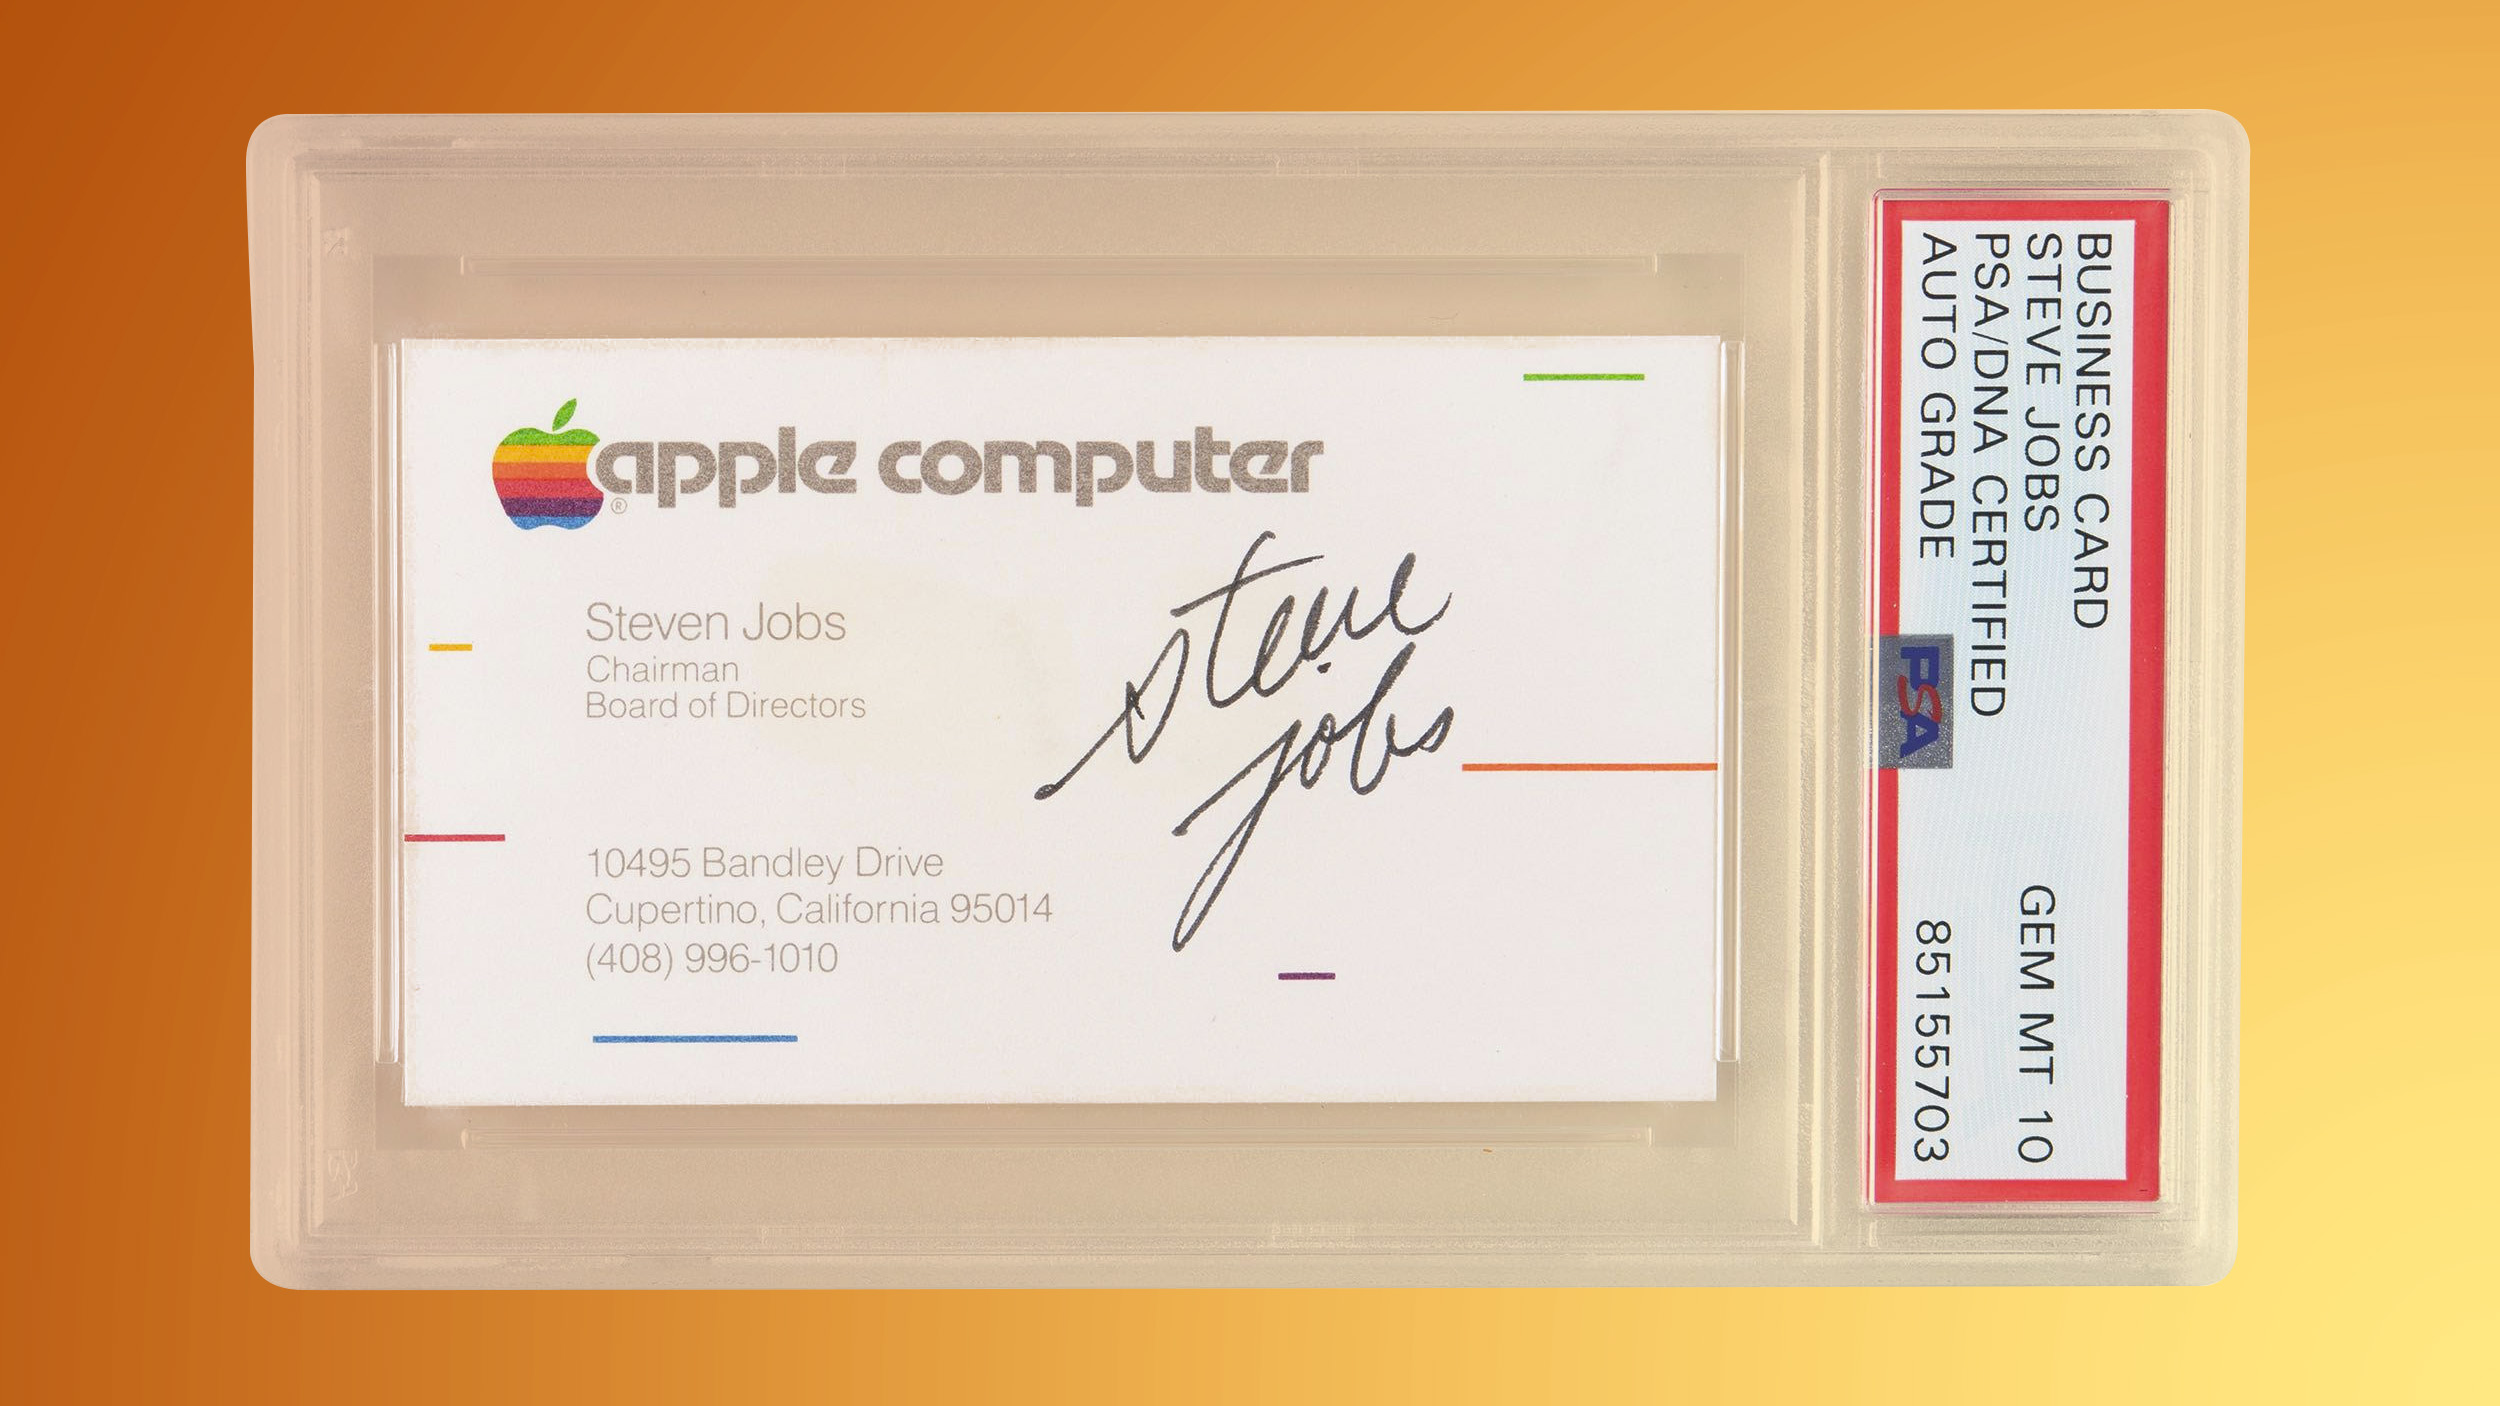 Steve Jobs Signed Business Card Fetches Over $180,000 at Auction